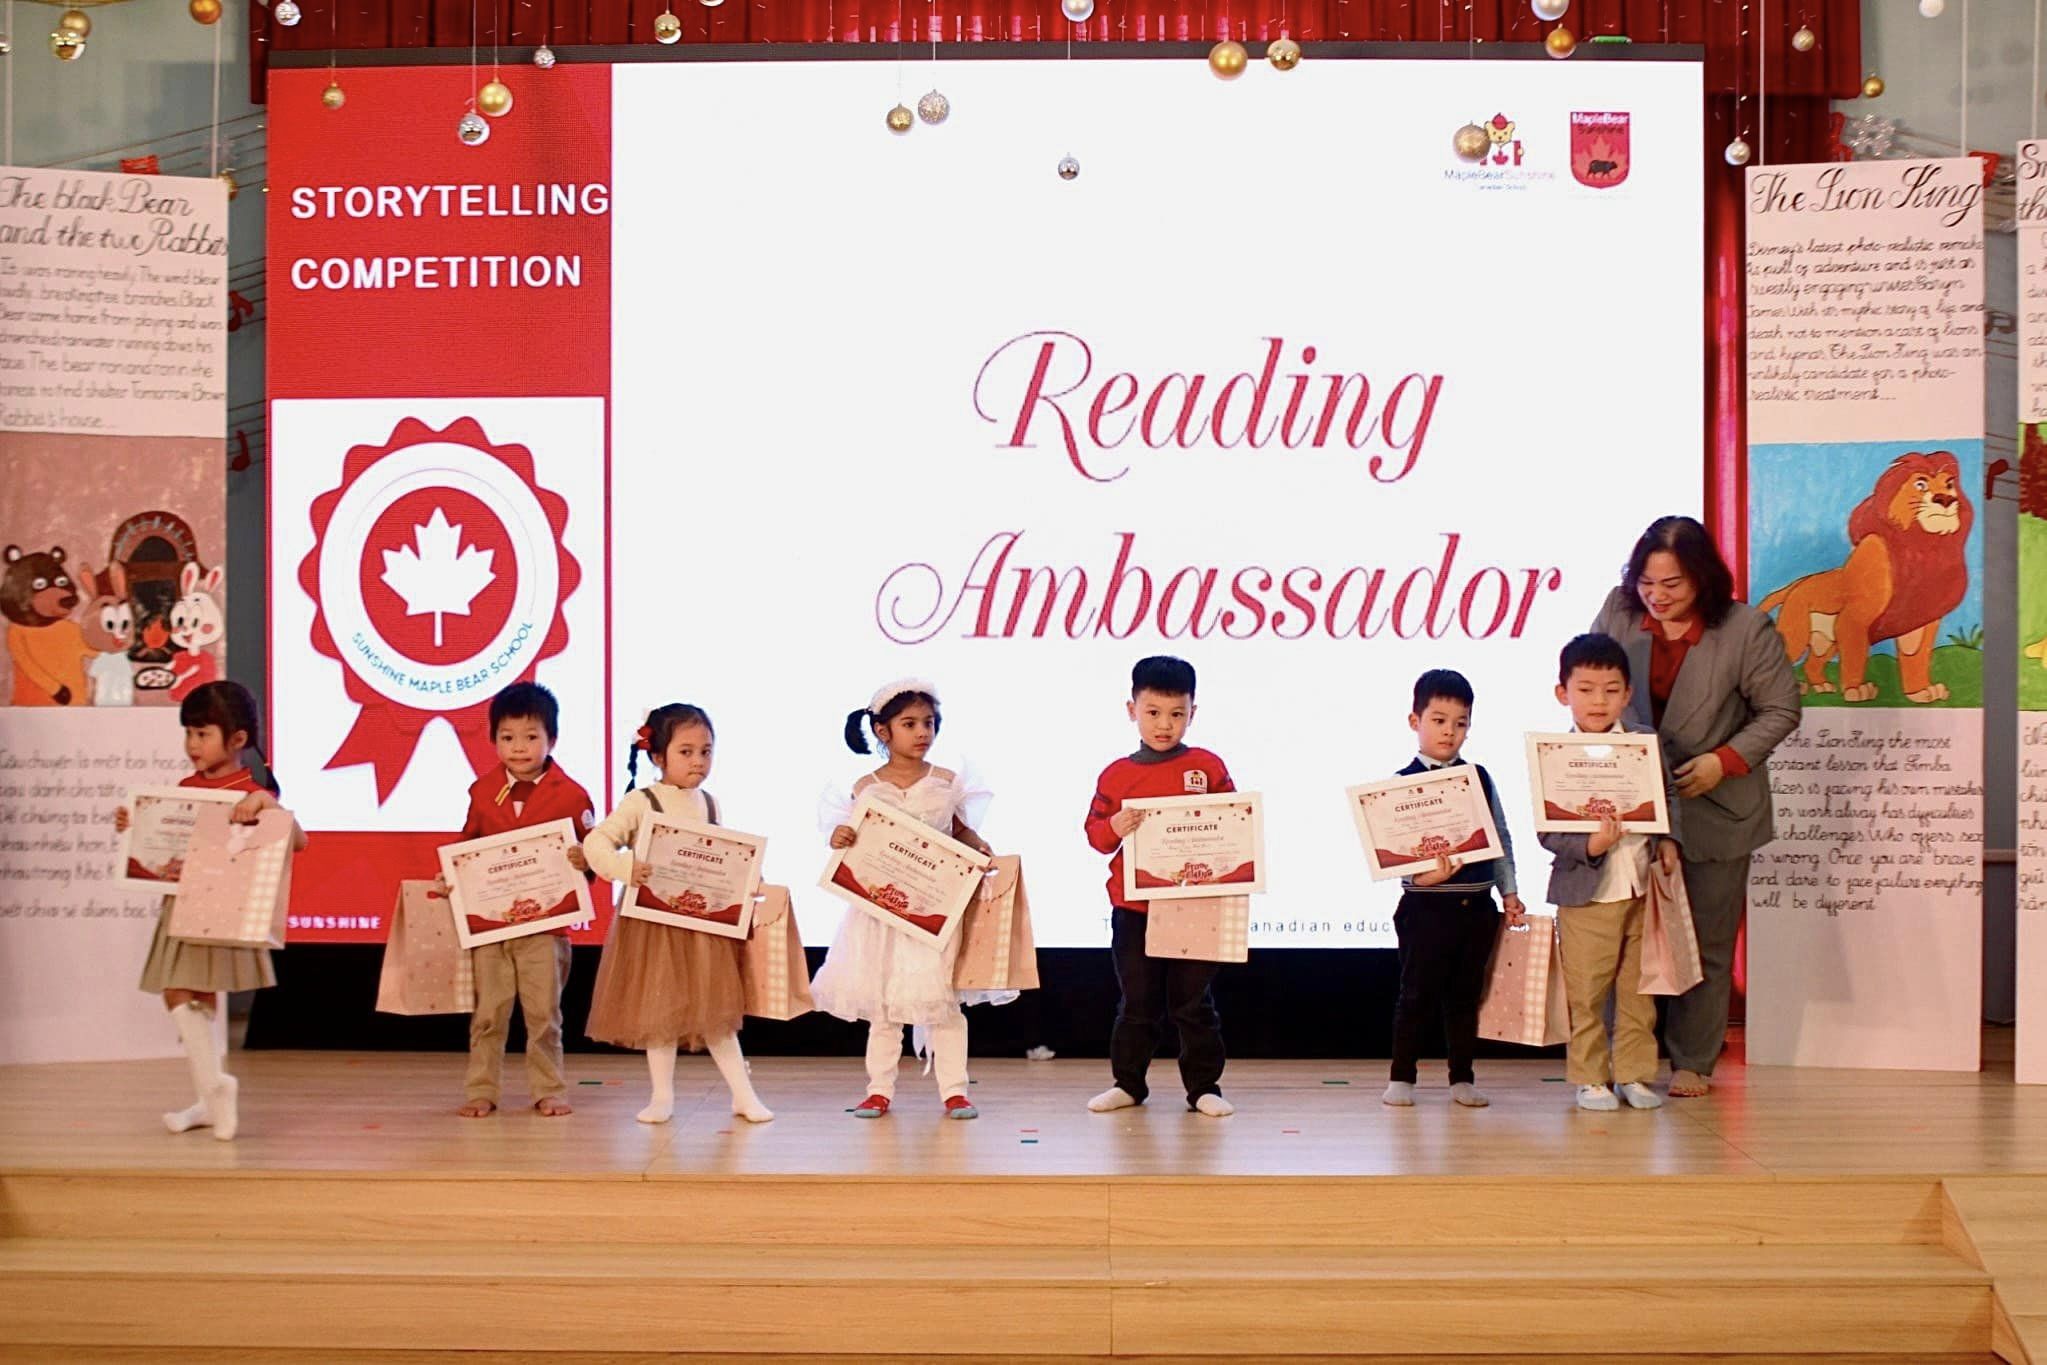 Storytelling competition